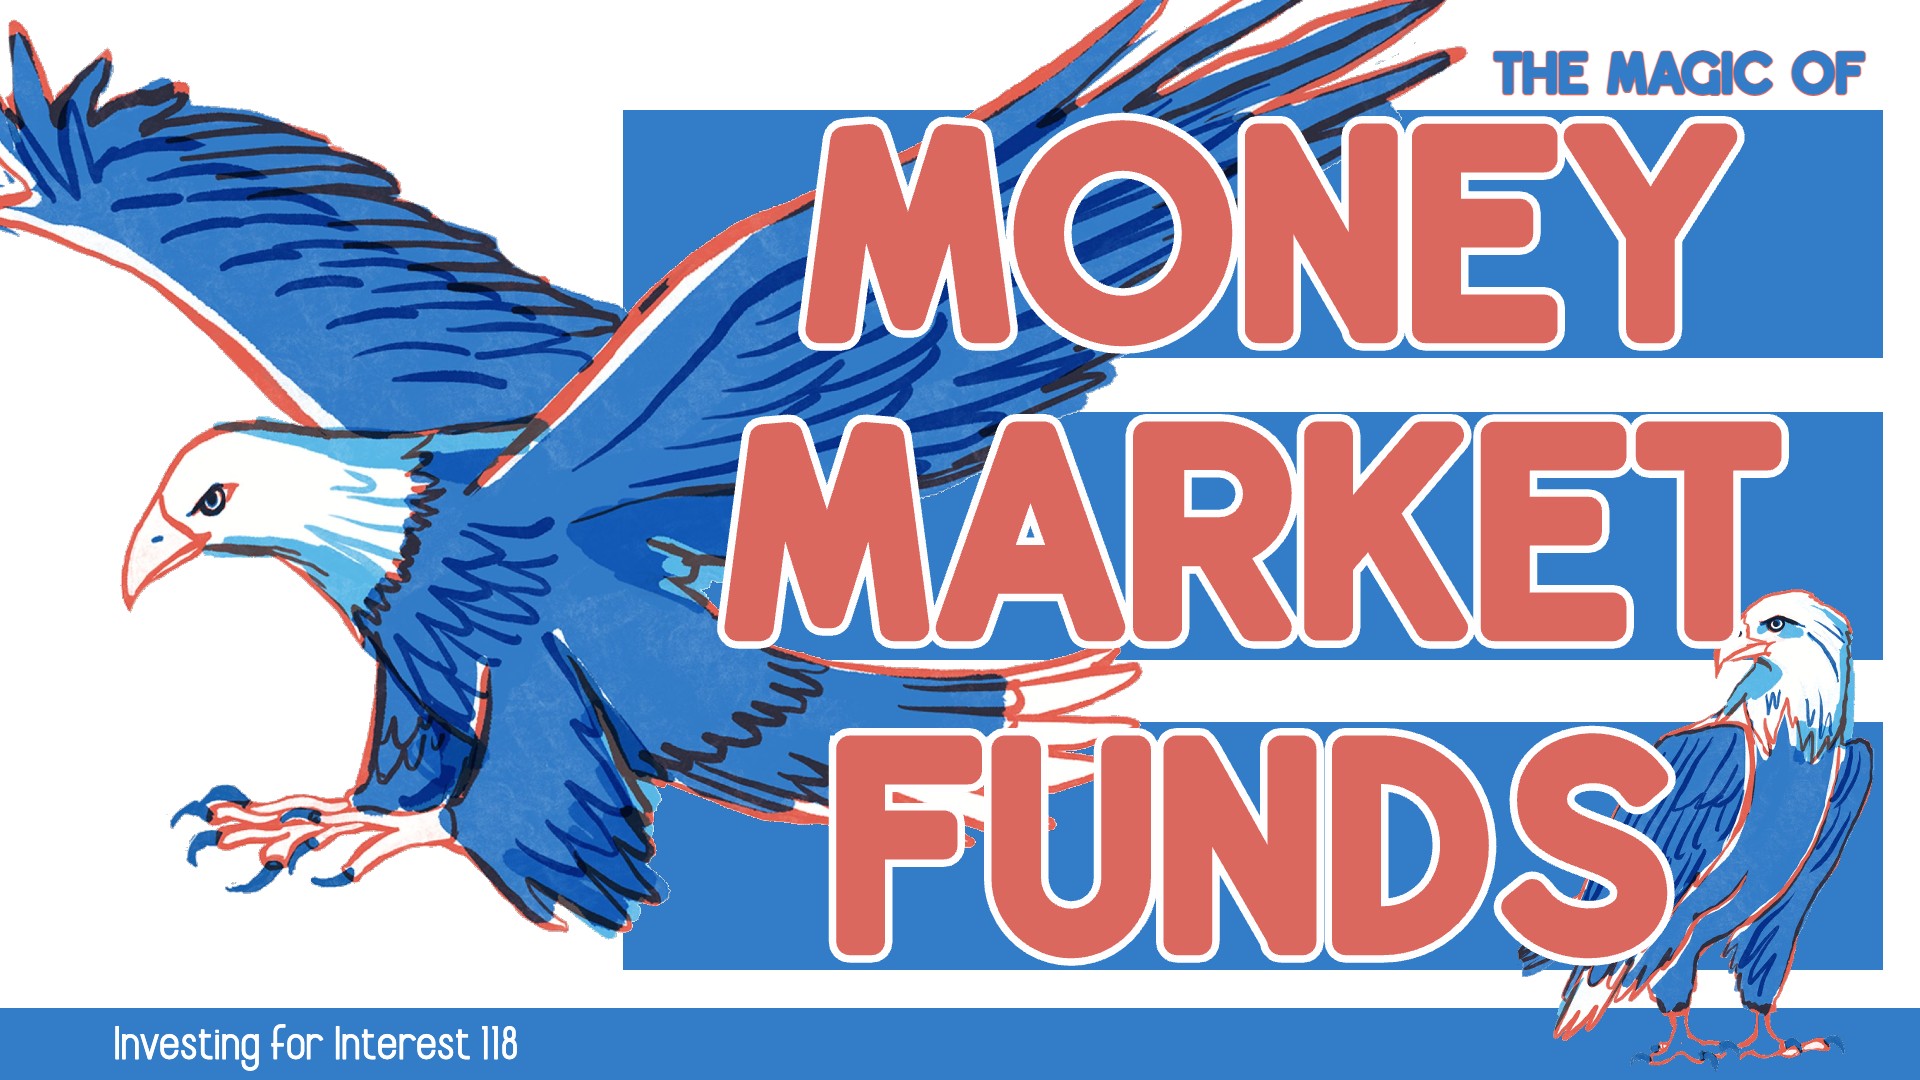 The Magic of Money Market Funds